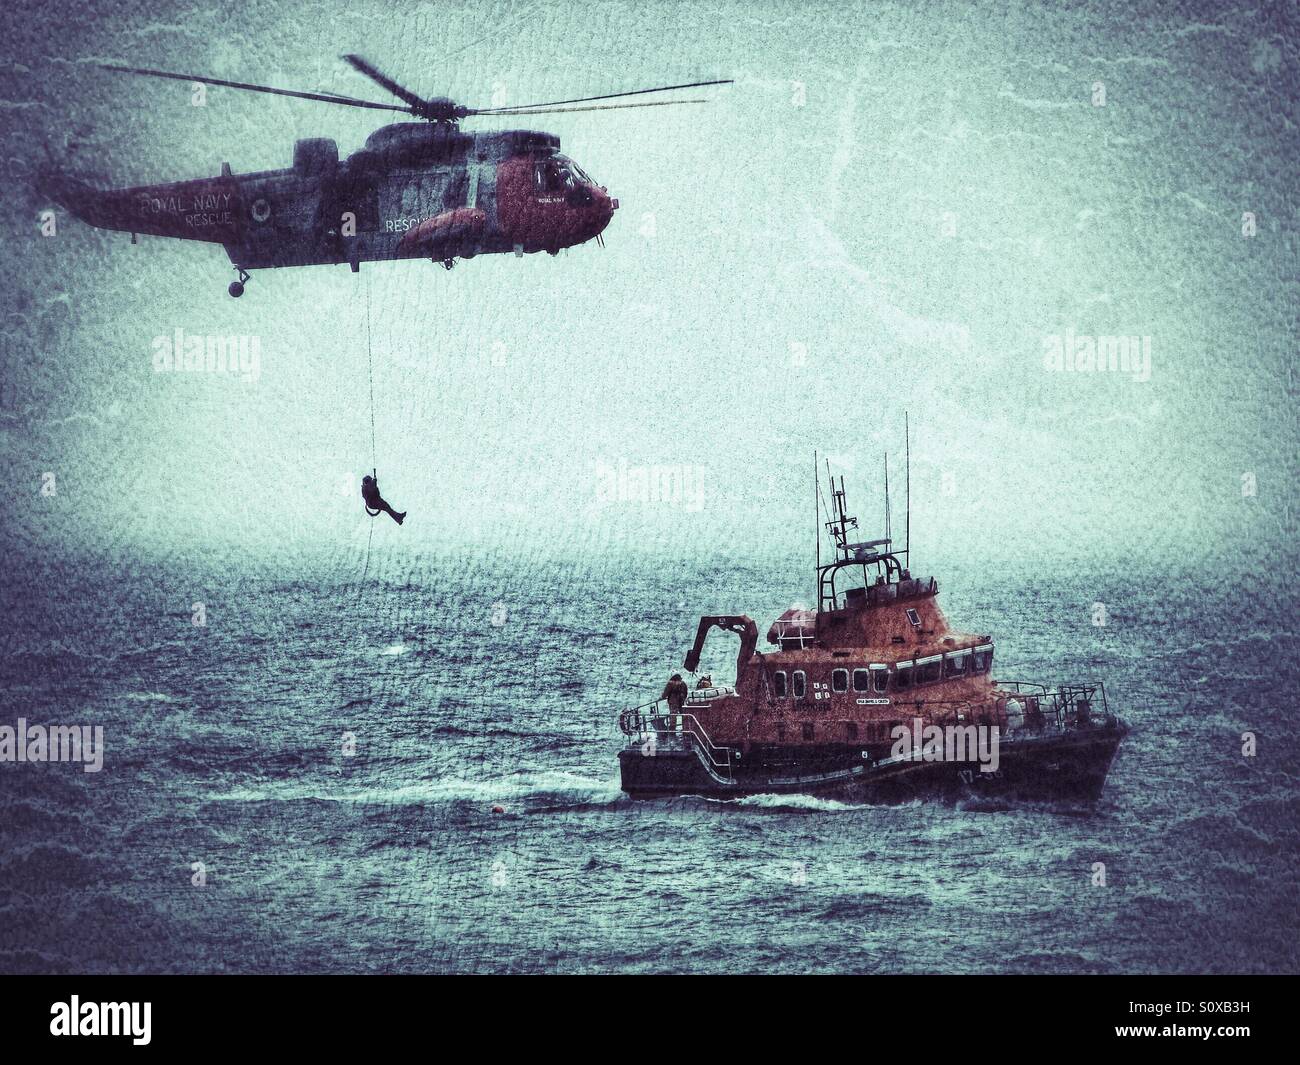 A Royal Navy Rescue helicopter lowering a lifeguard onto an RNLI lifeboat during stormy weather. Stock Photo